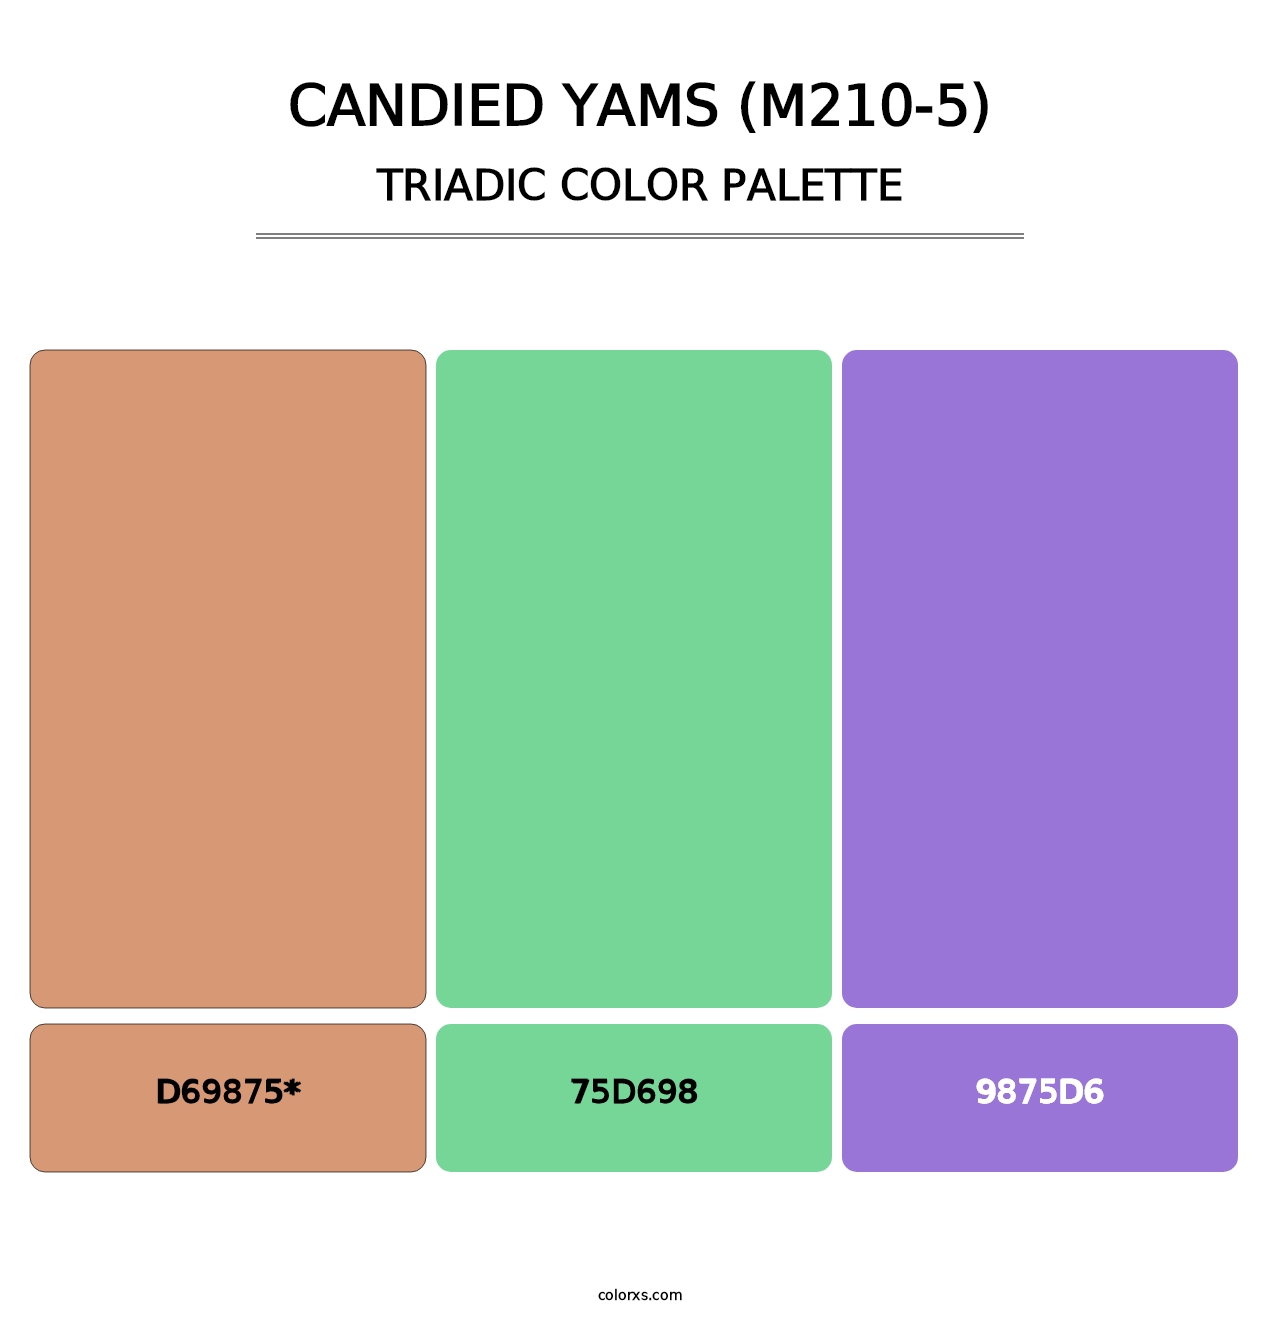 Candied Yams (M210-5) - Triadic Color Palette